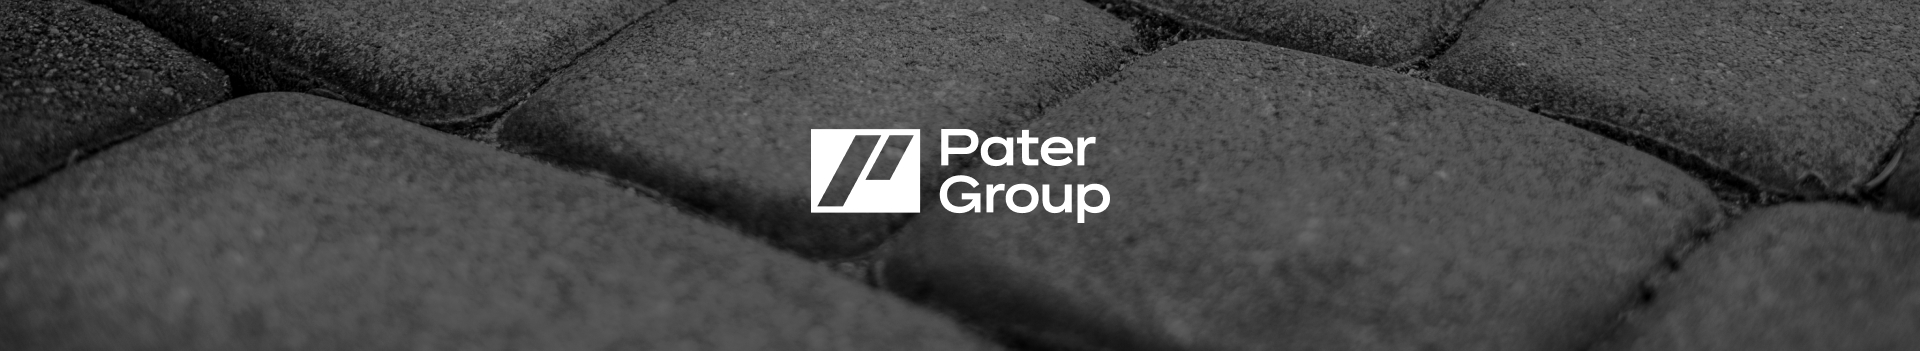 Pater Group